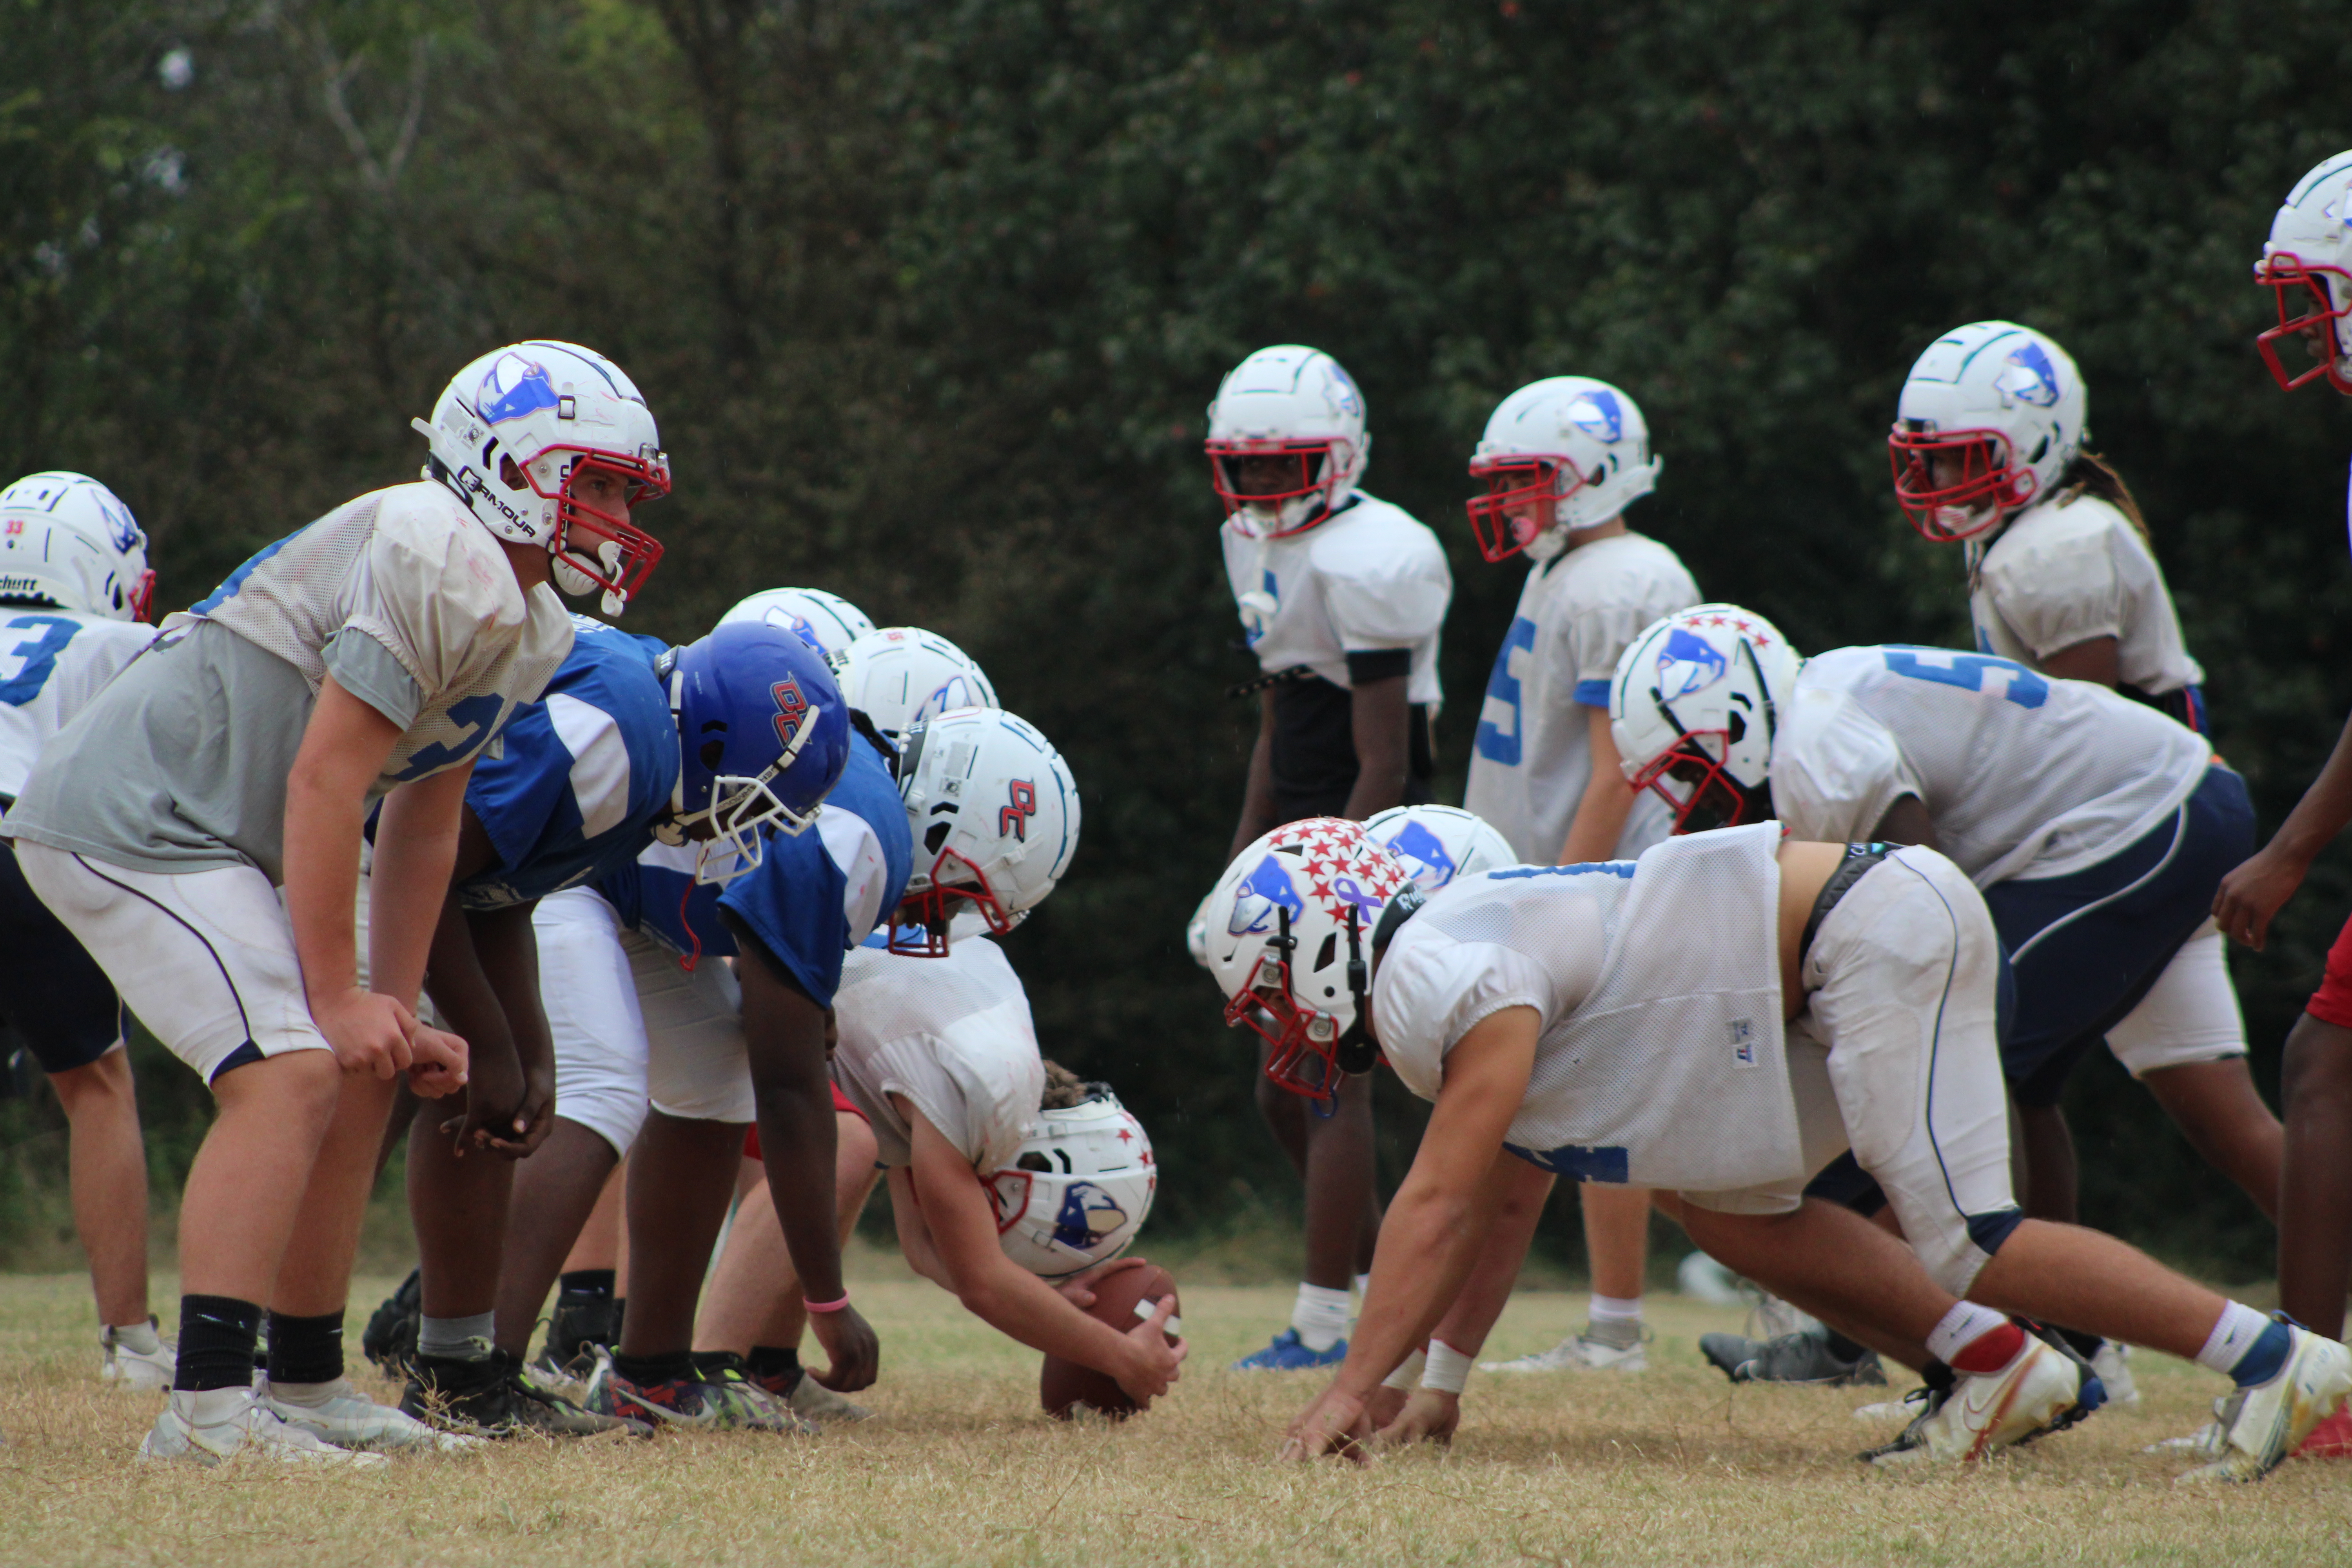 Oglethorpe County's football team scrimmages offense versus defense on Wednesday, Oct. 11 before its region opener against Prince Avenue. The Patriots are coming off of a bye week and will play the Wolverines at home at 7:30 p.m. Friday, Oct. 20. (LAUREN HILL/THE OGLETHORPE ECHO)